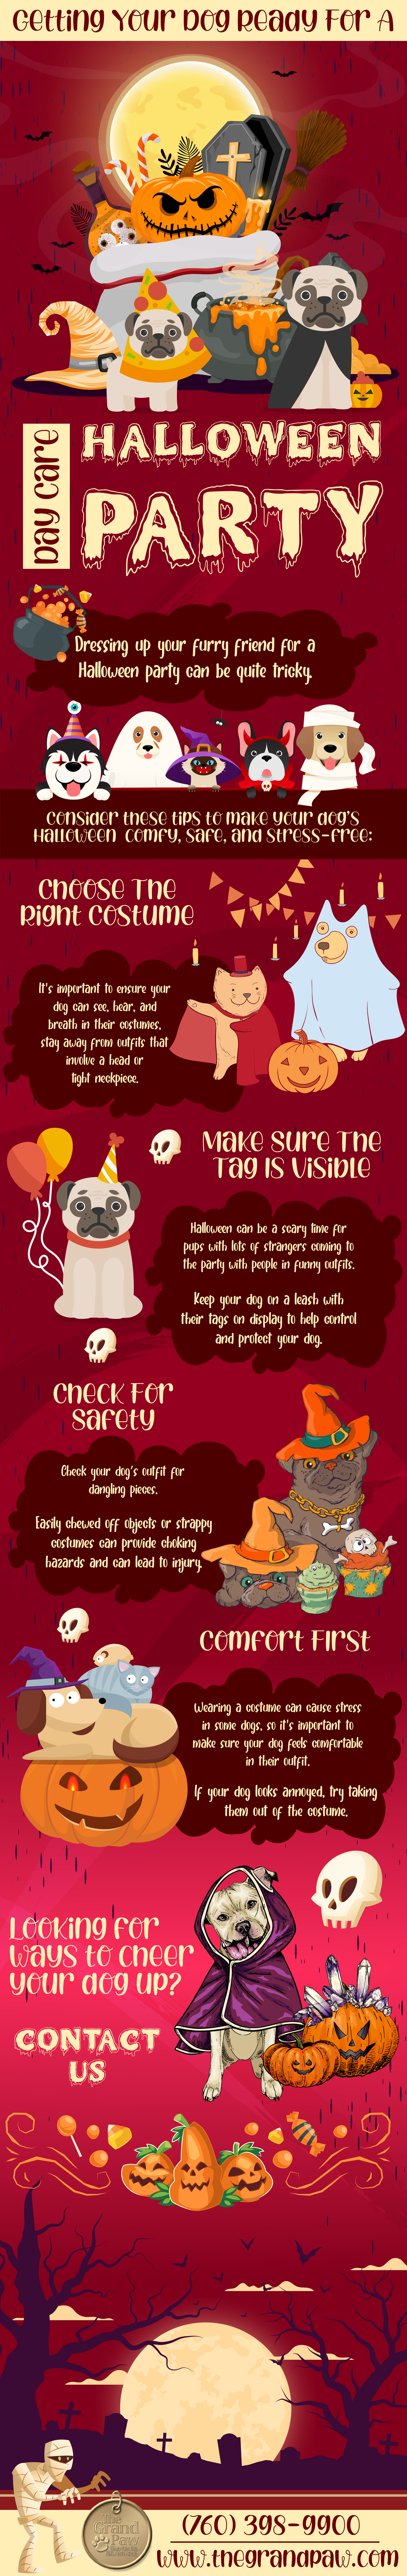 Getting your dog ready for halloween